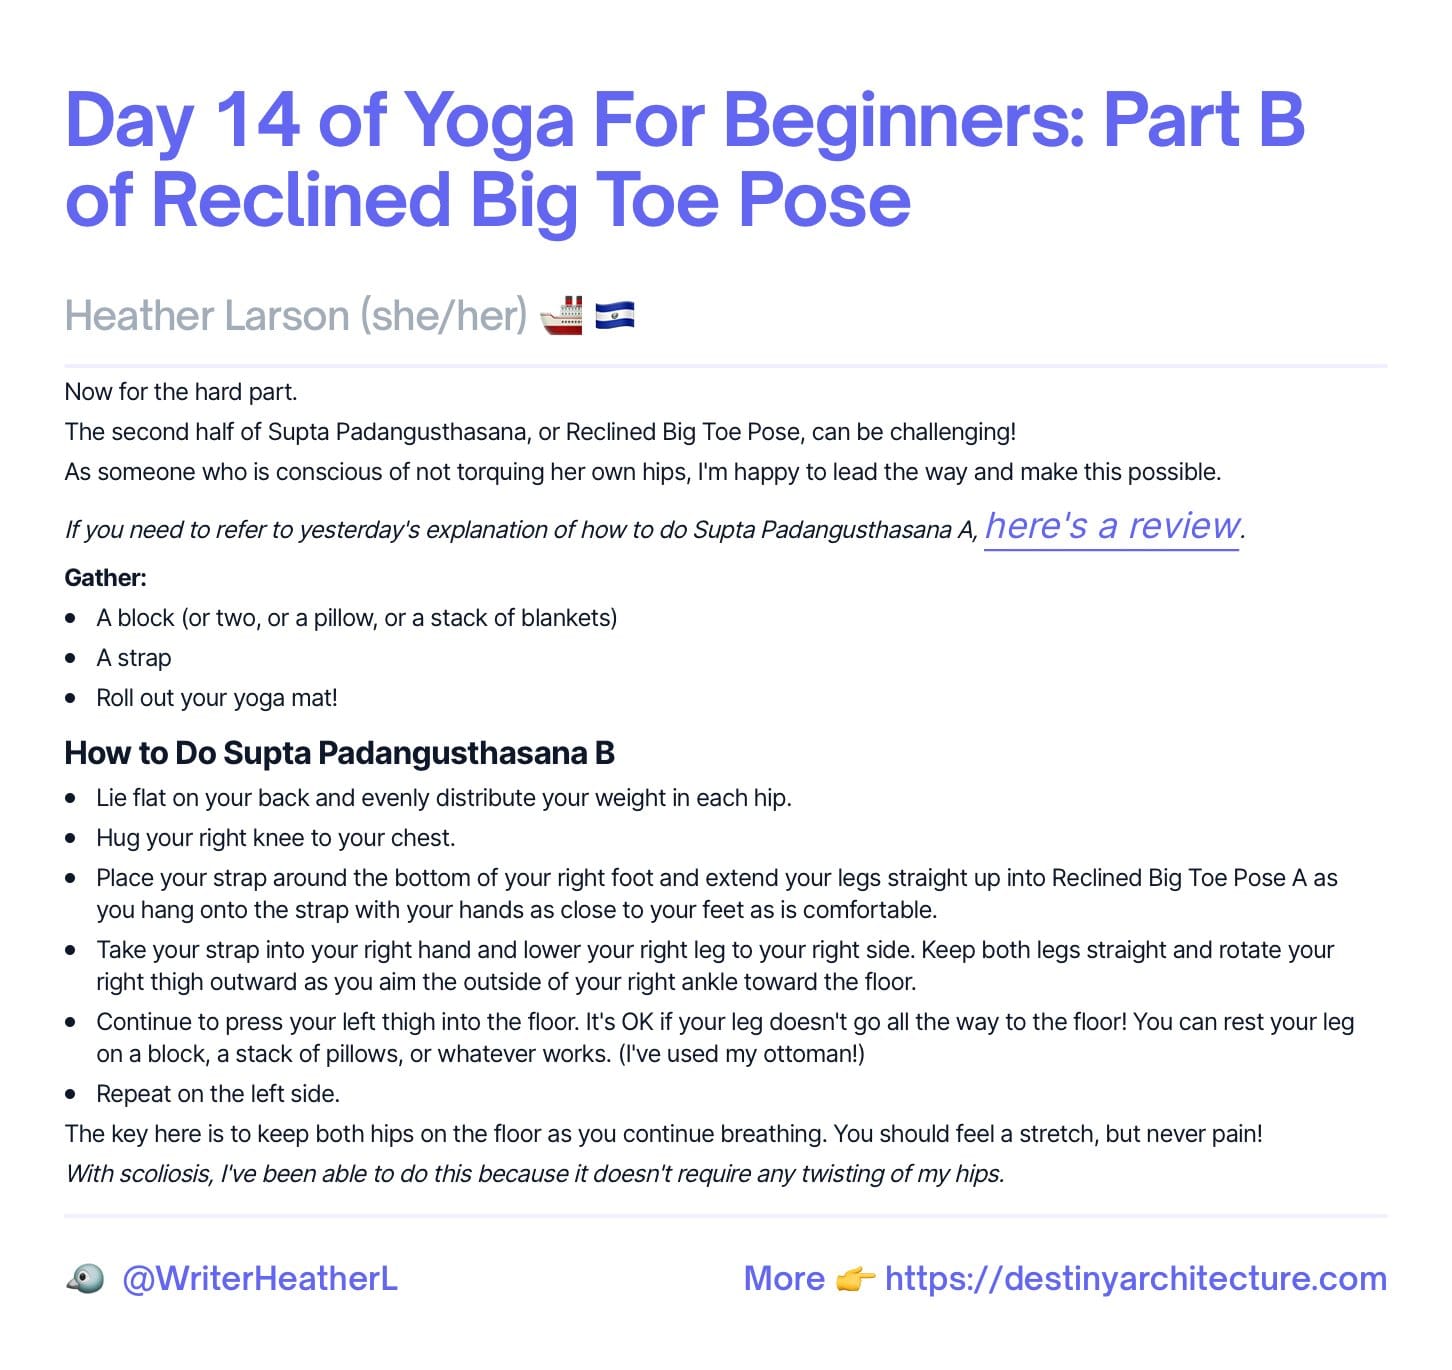 Day 14 of Yoga For Beginners: Part B of Reclined Big Toe Pose